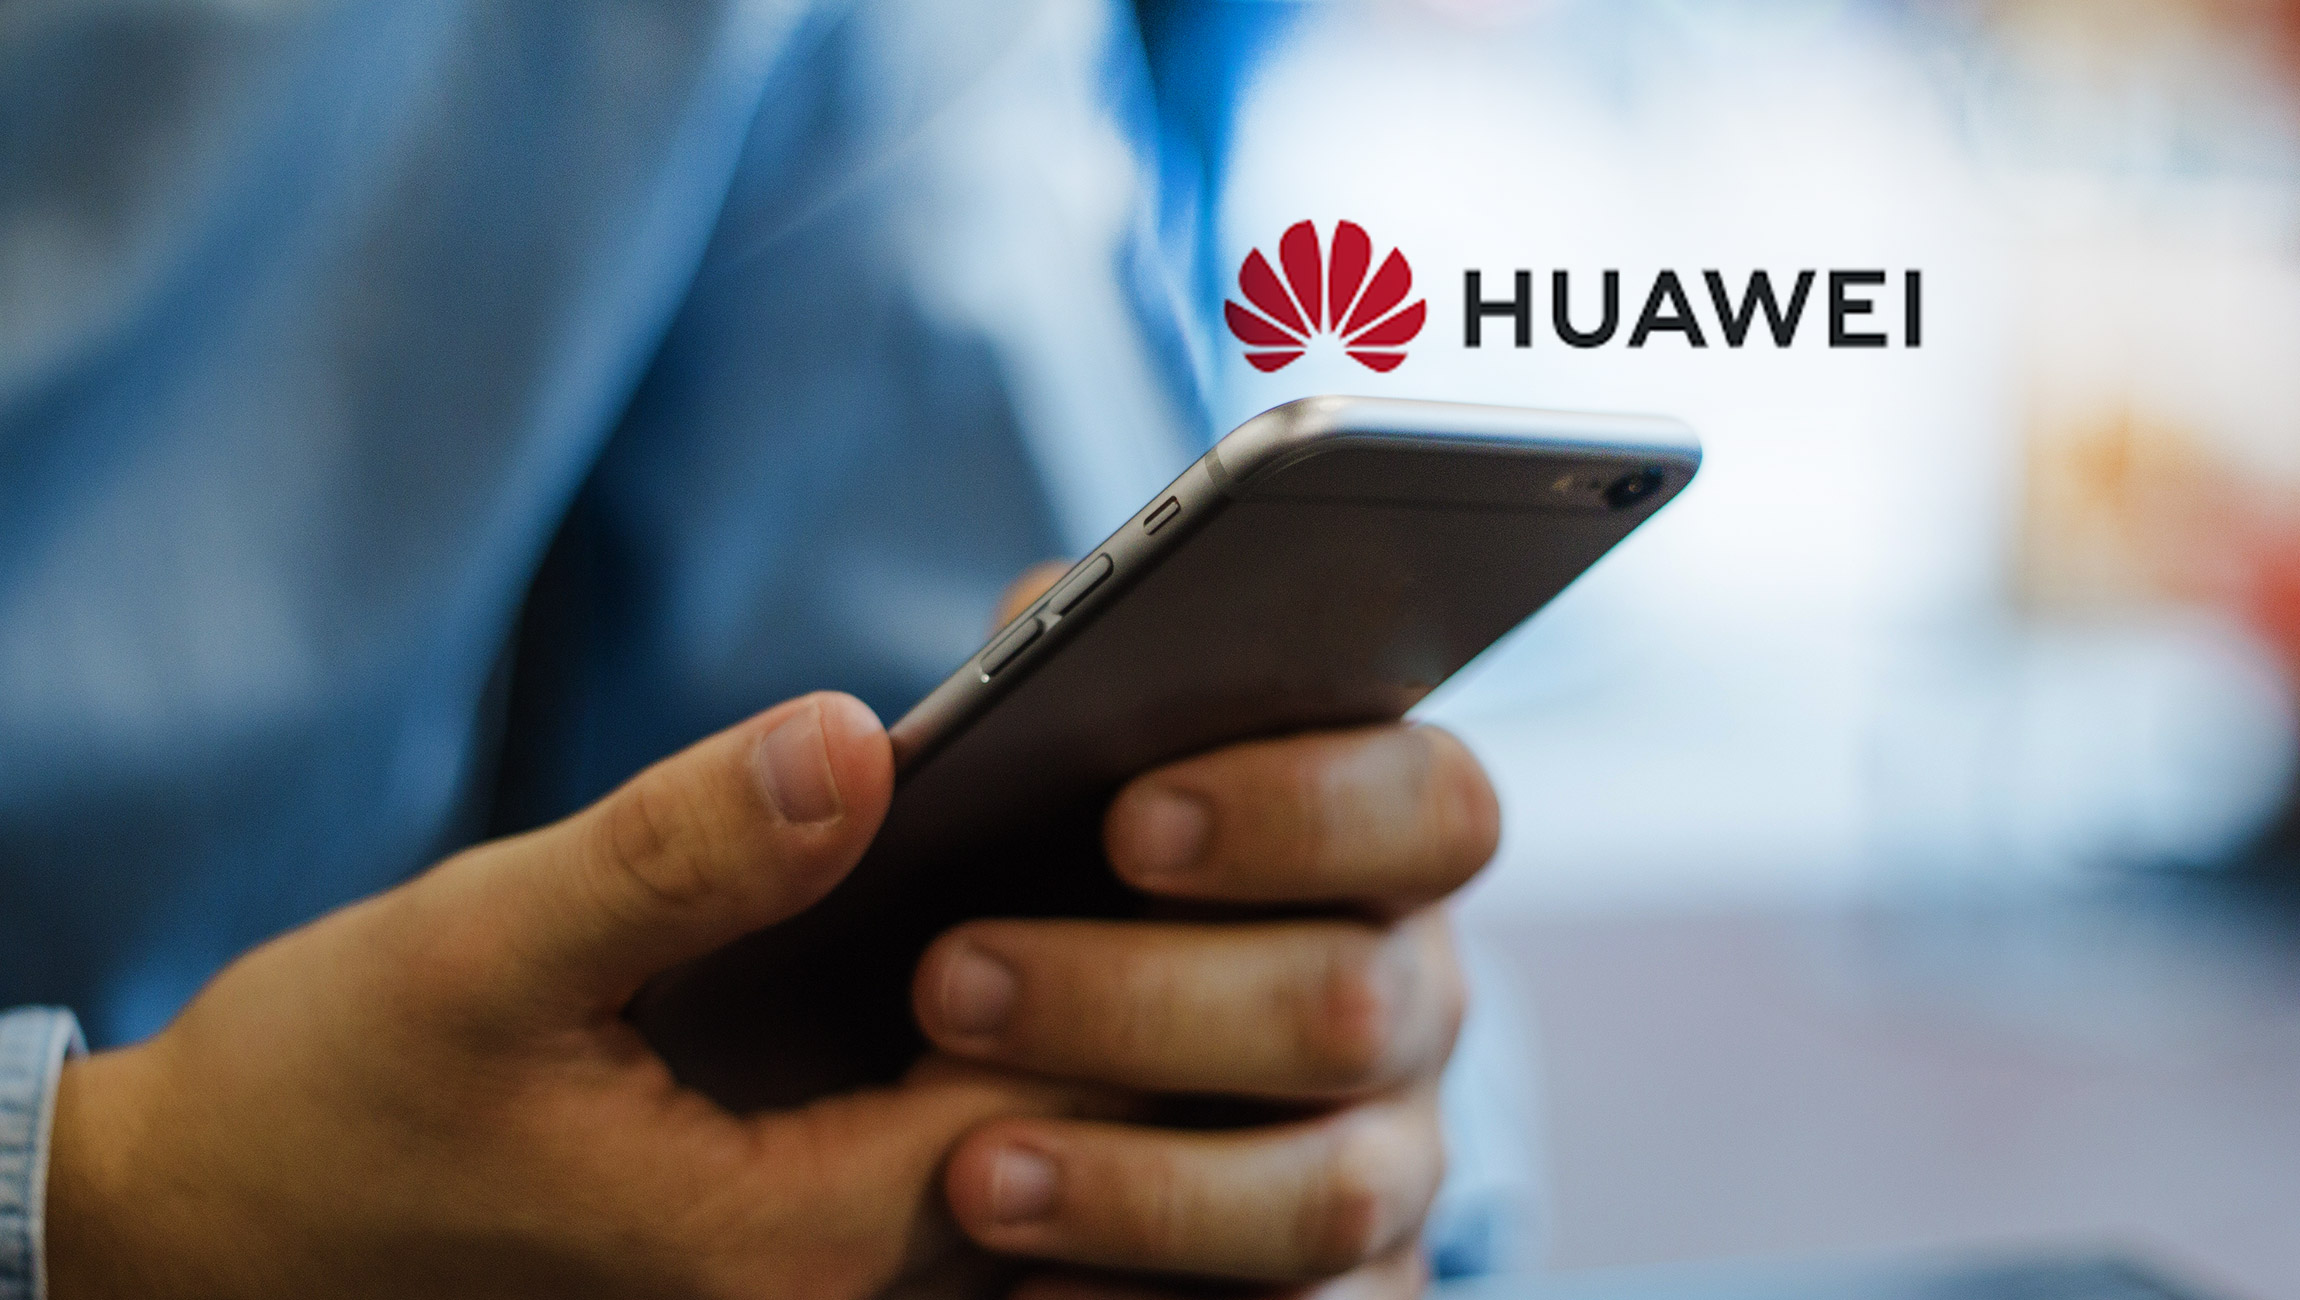 Huawei's Petal Search Sets Roots in MEA, Climbs to Top 2 Mobile Search Engines in the Region